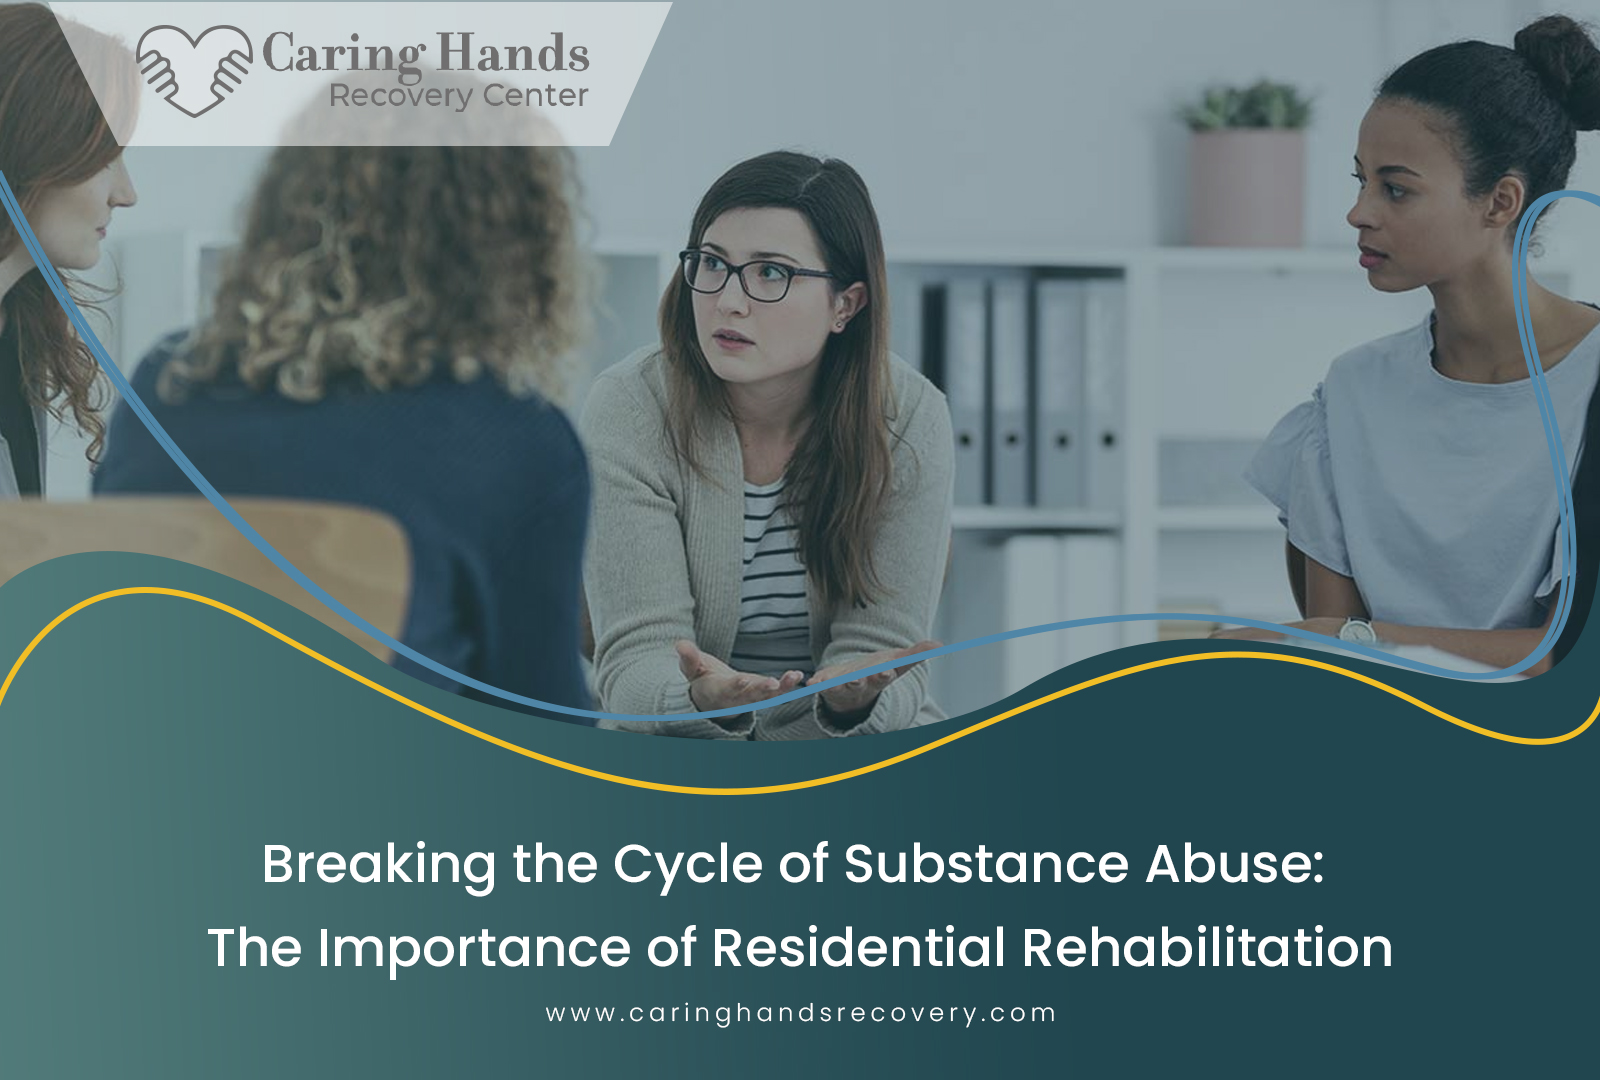 Breaking the Cycle of Substance Abuse: The Importance of Residential Rehabilitation